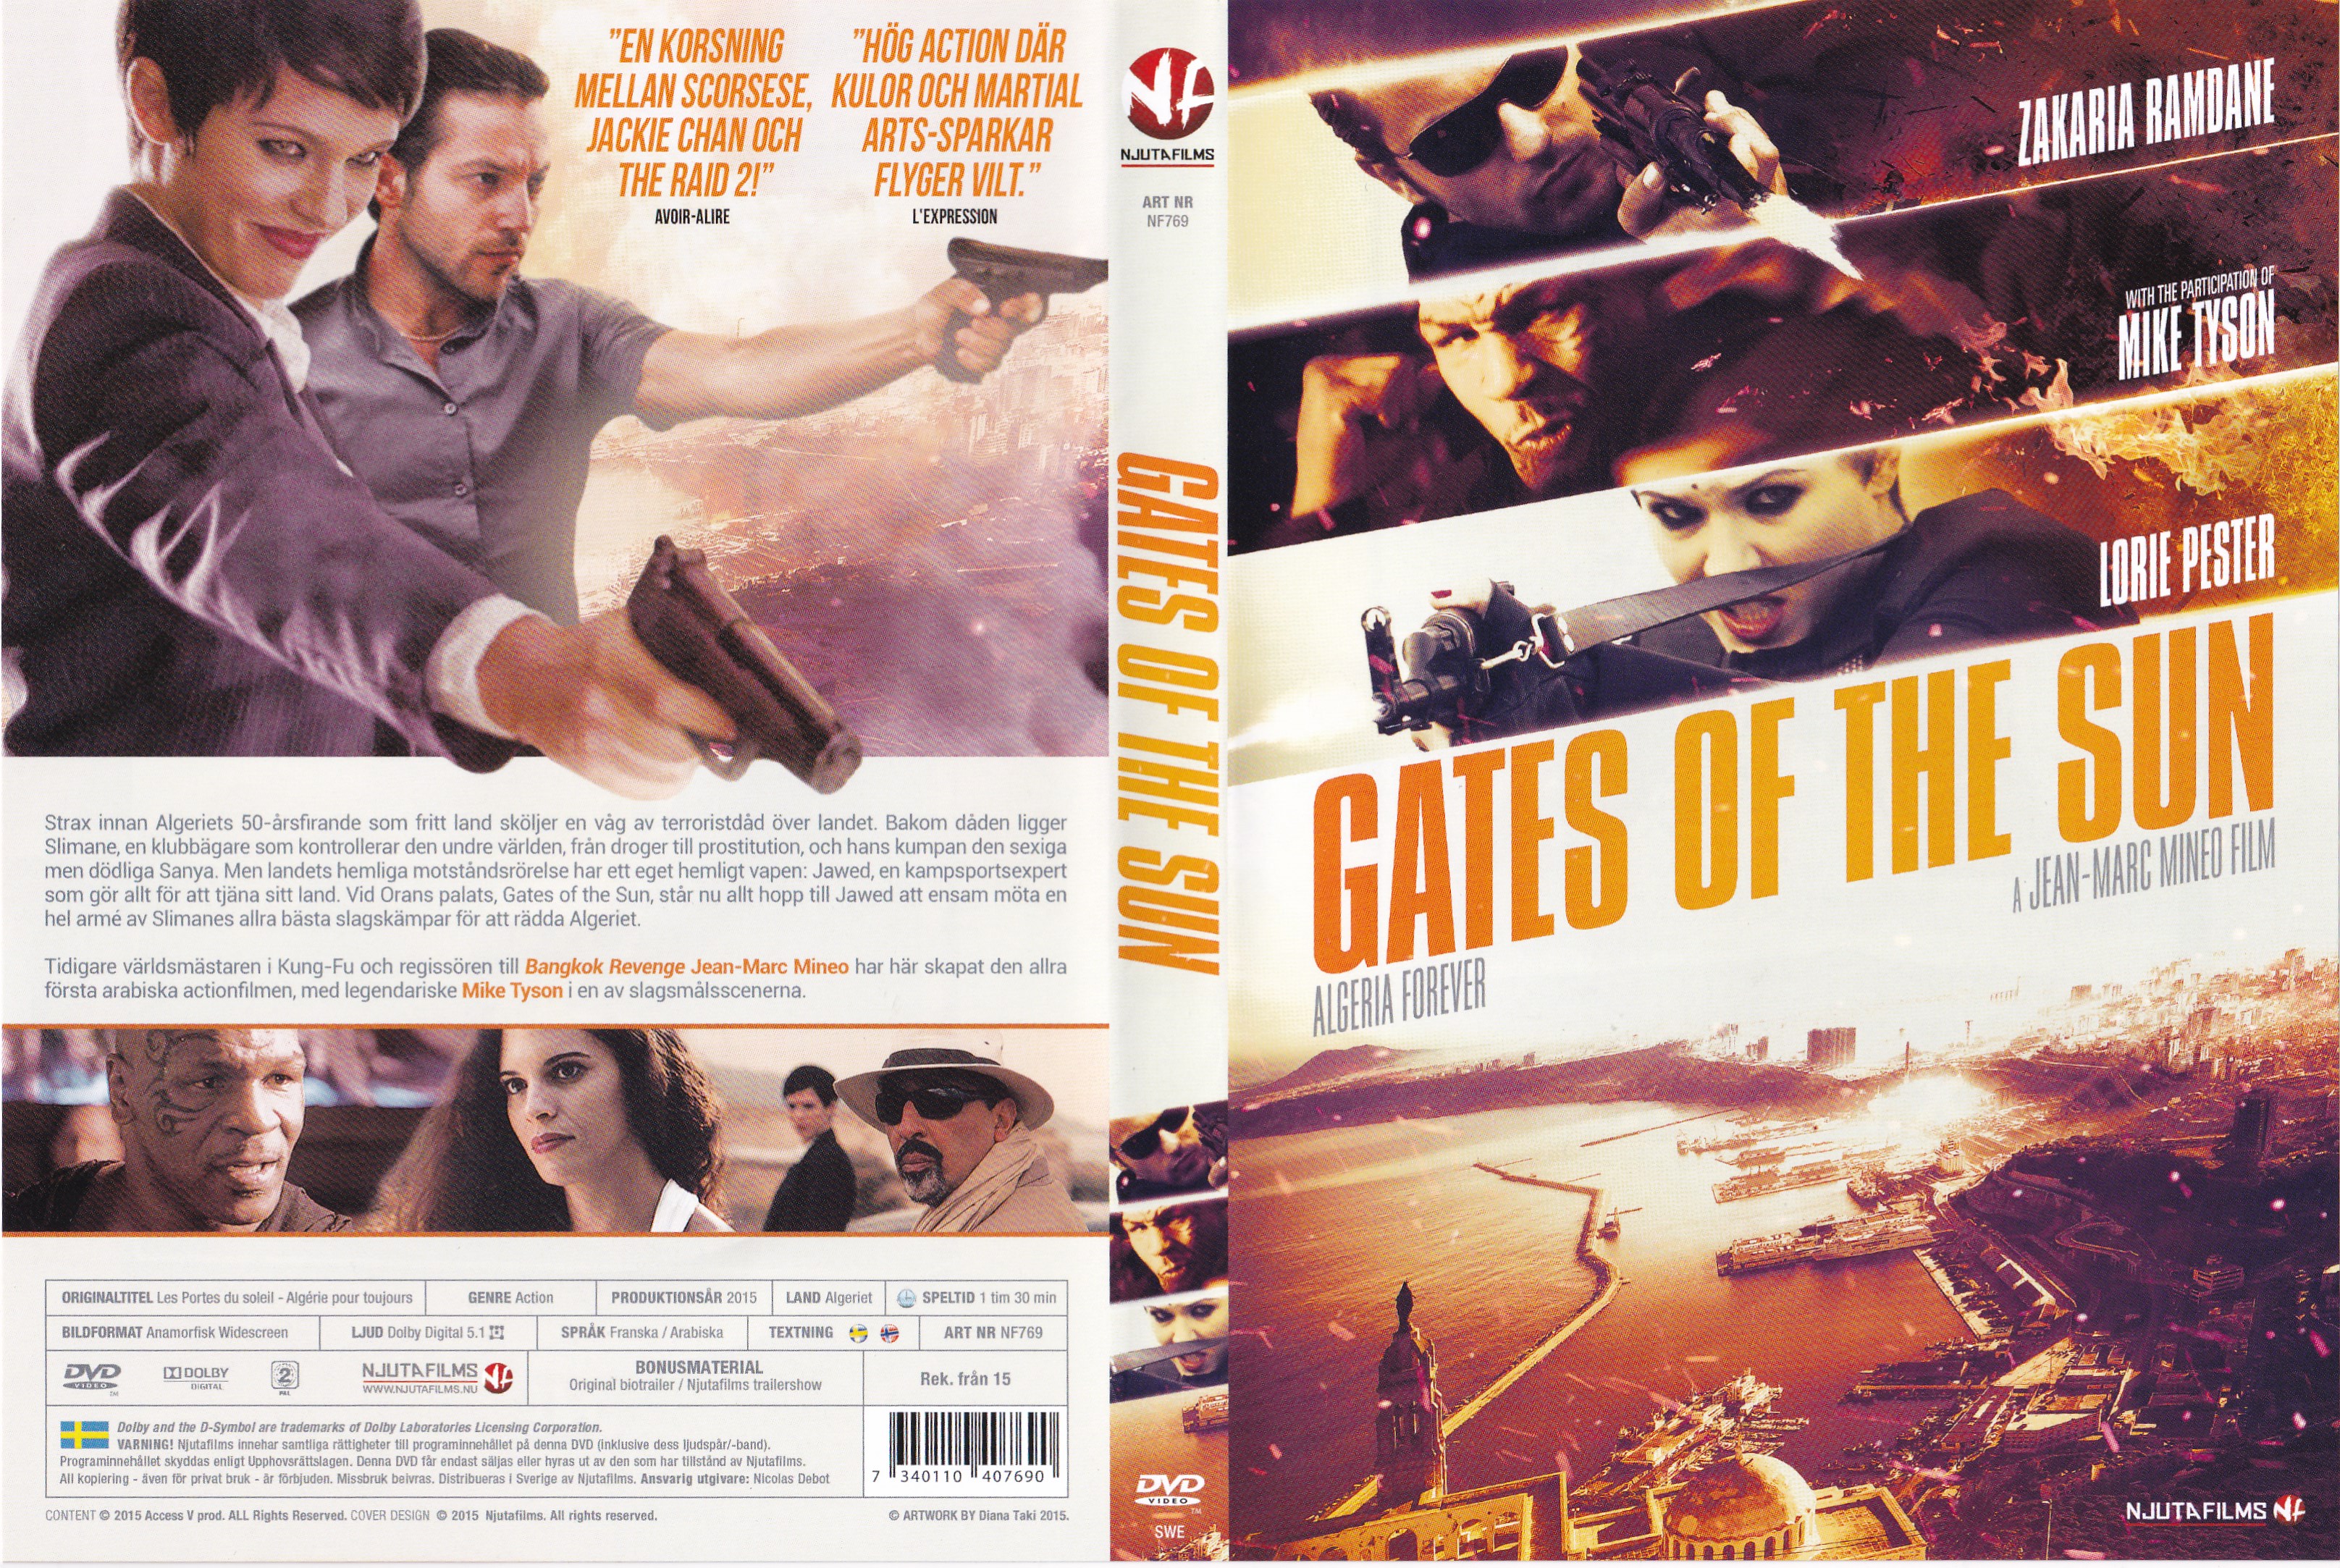 Jaquette DVD Gates of the Sun